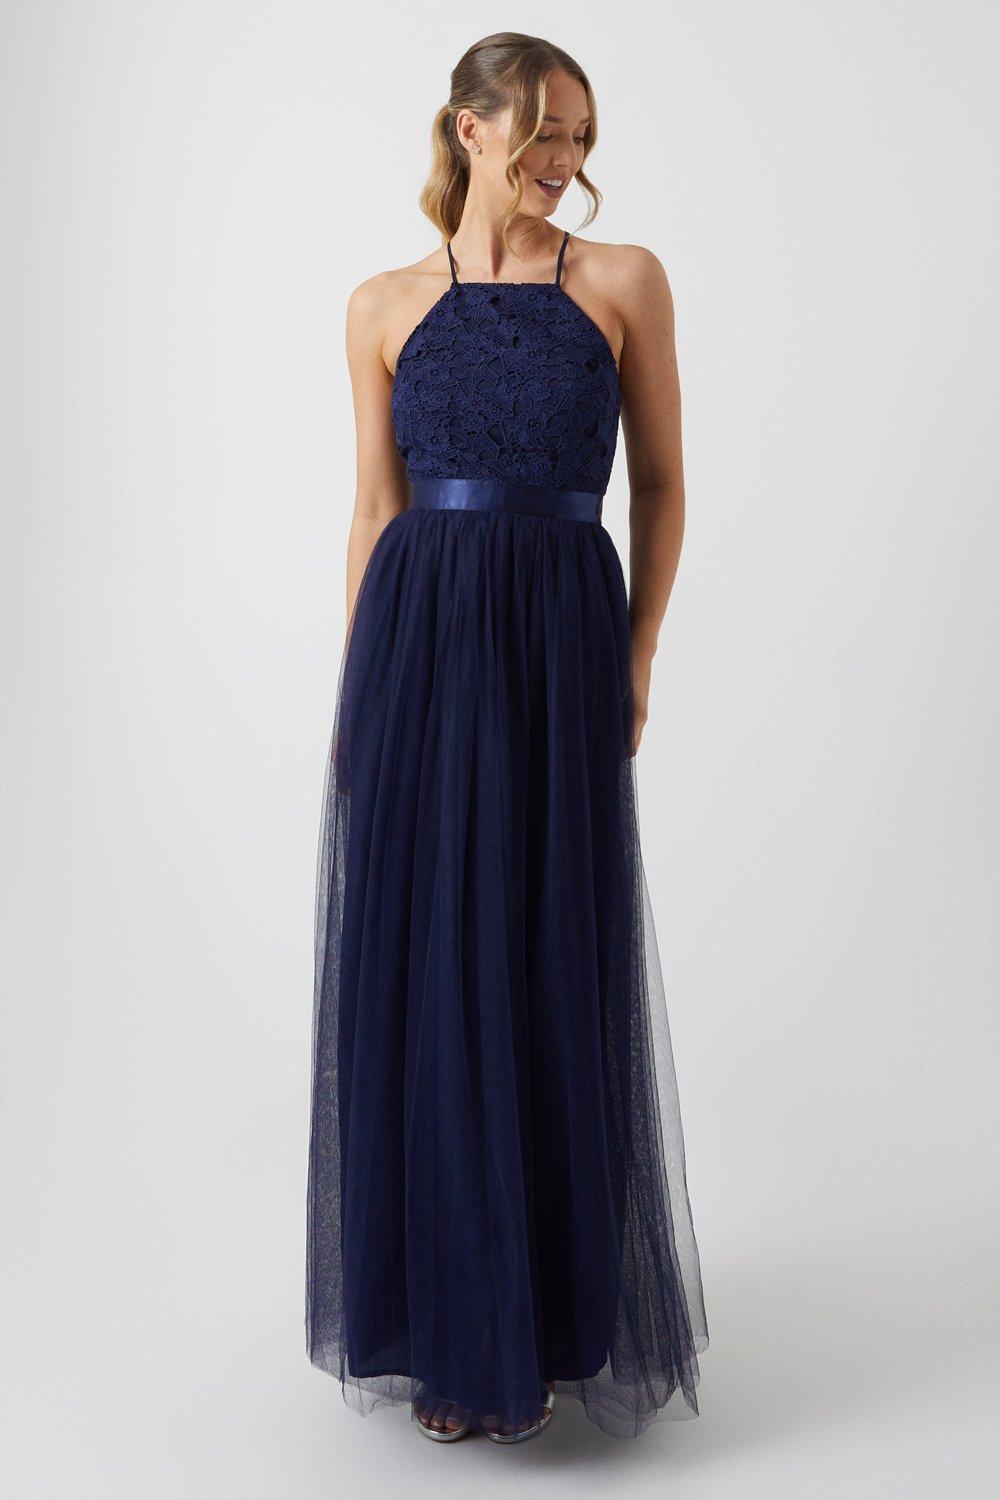 Crochet Lace Square Neck Two In One Bridesmaids Maxi Dress - Navy